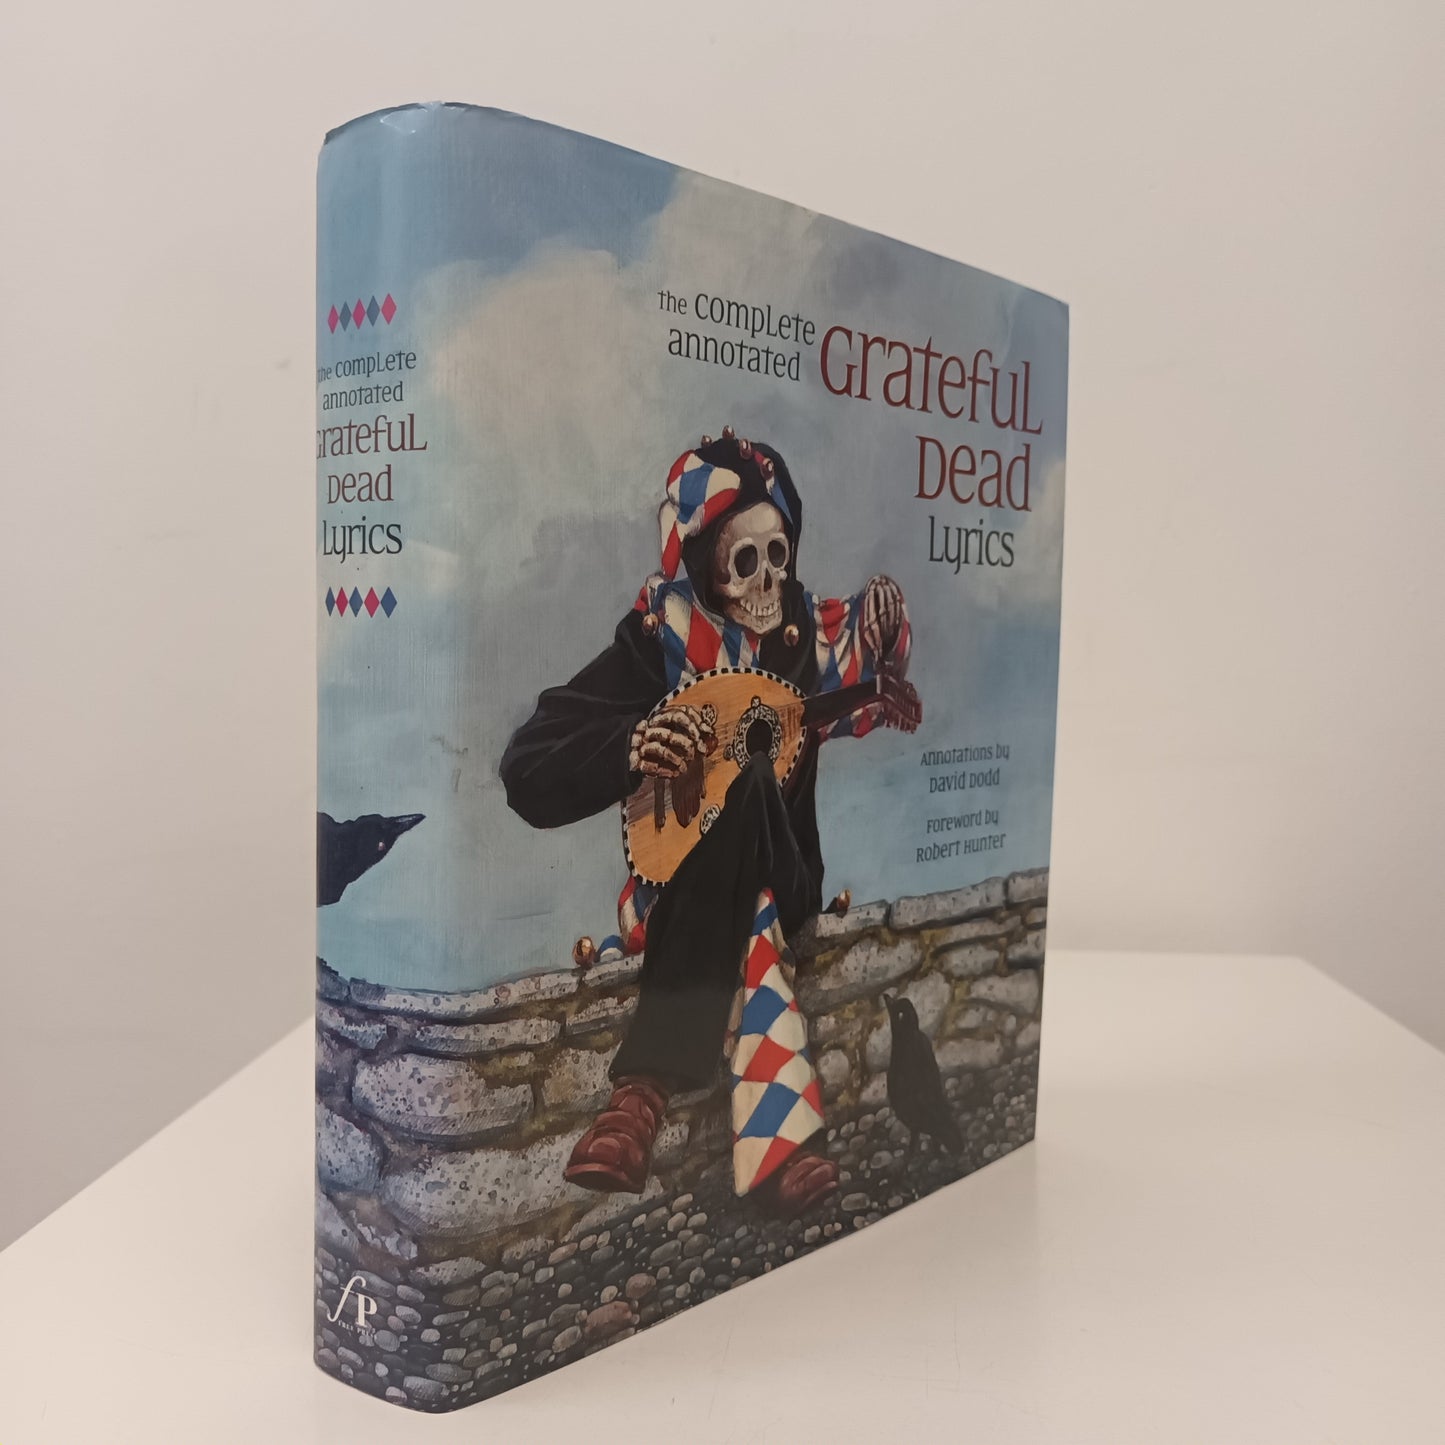 The Complete Annotated Grateful Dead Lyrics Hard Back Book By Grateful Dead